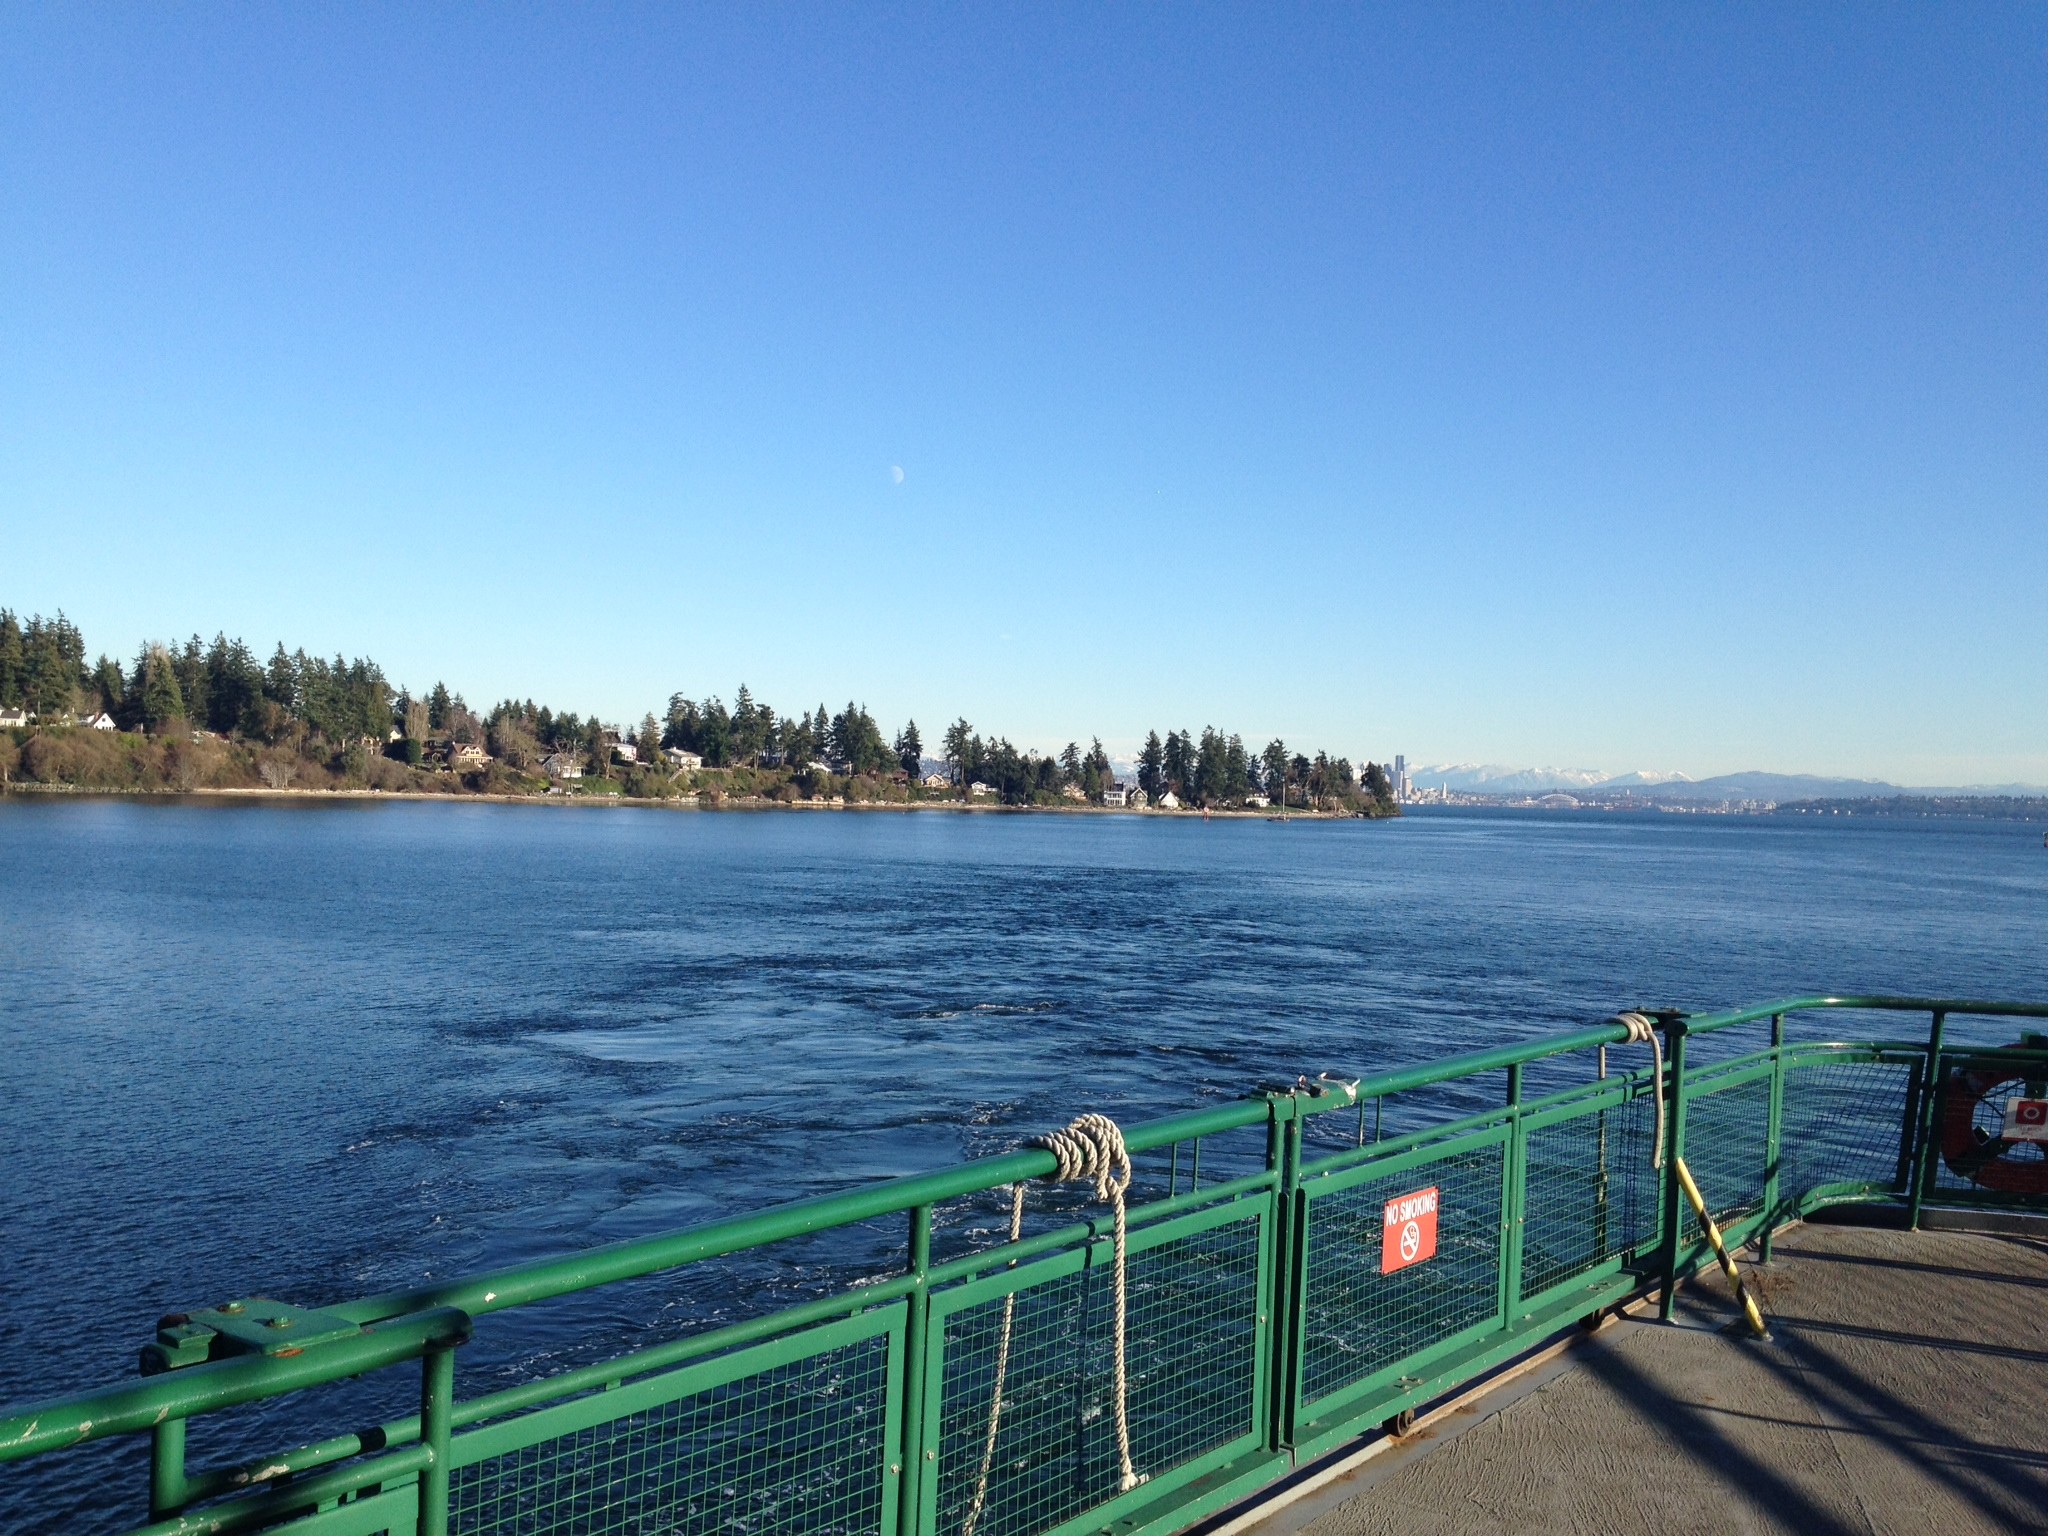 2048x1536 On a nice day, this is what it looks like before leaving Bainbridge. On